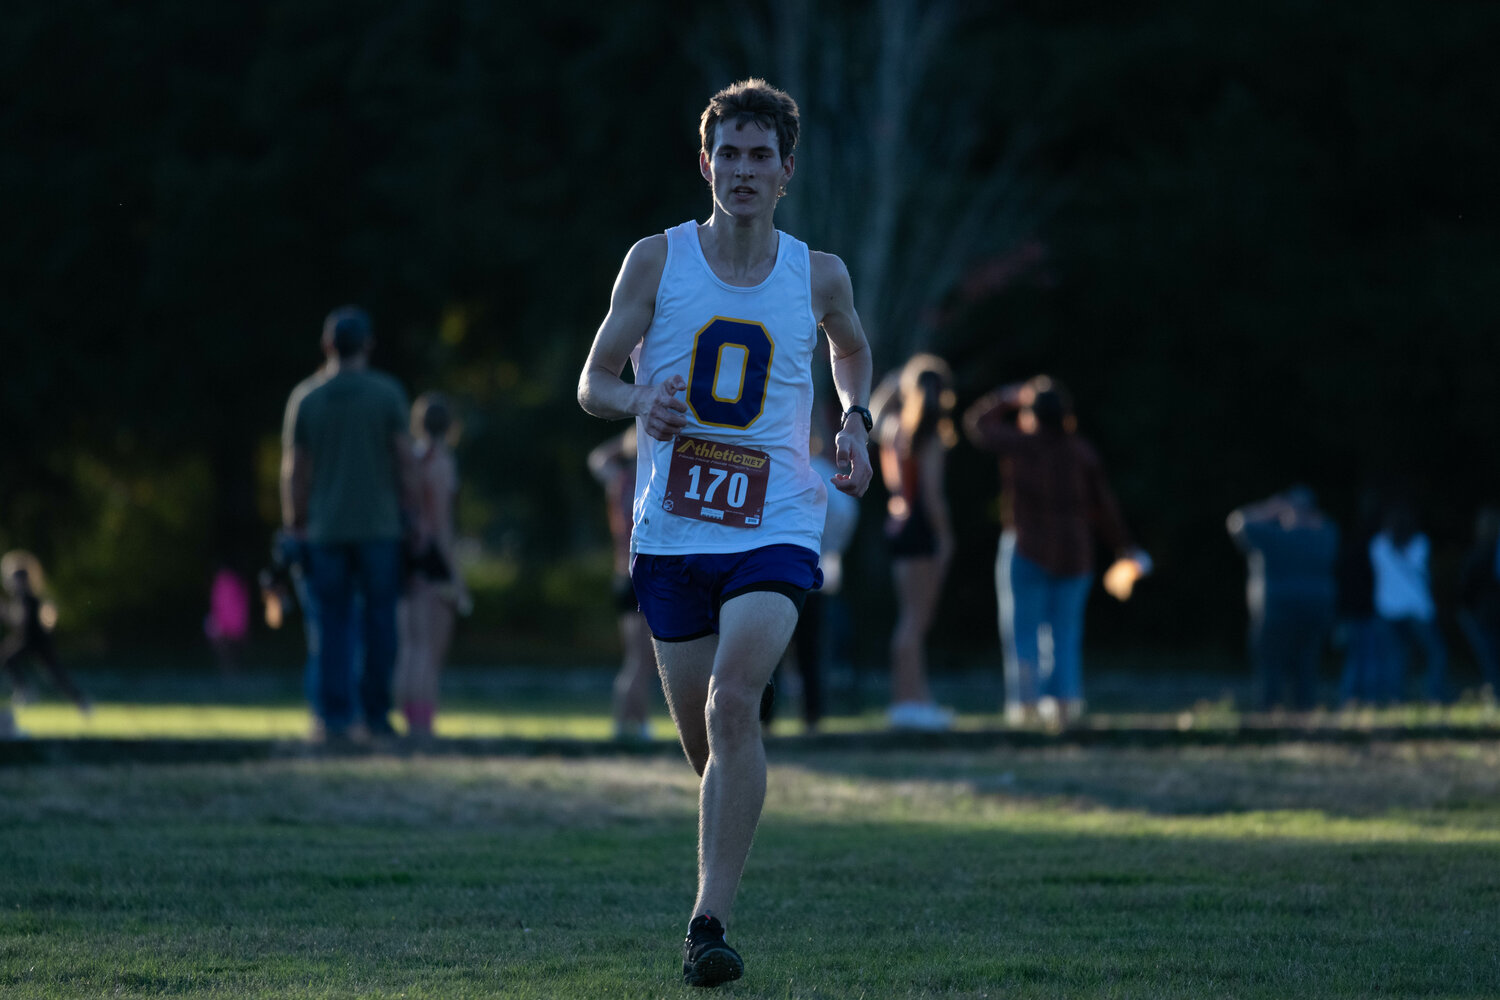 Isaac Fitch comes in to finish at the C2BL championship meet on Oct. 19 in Onalaska.